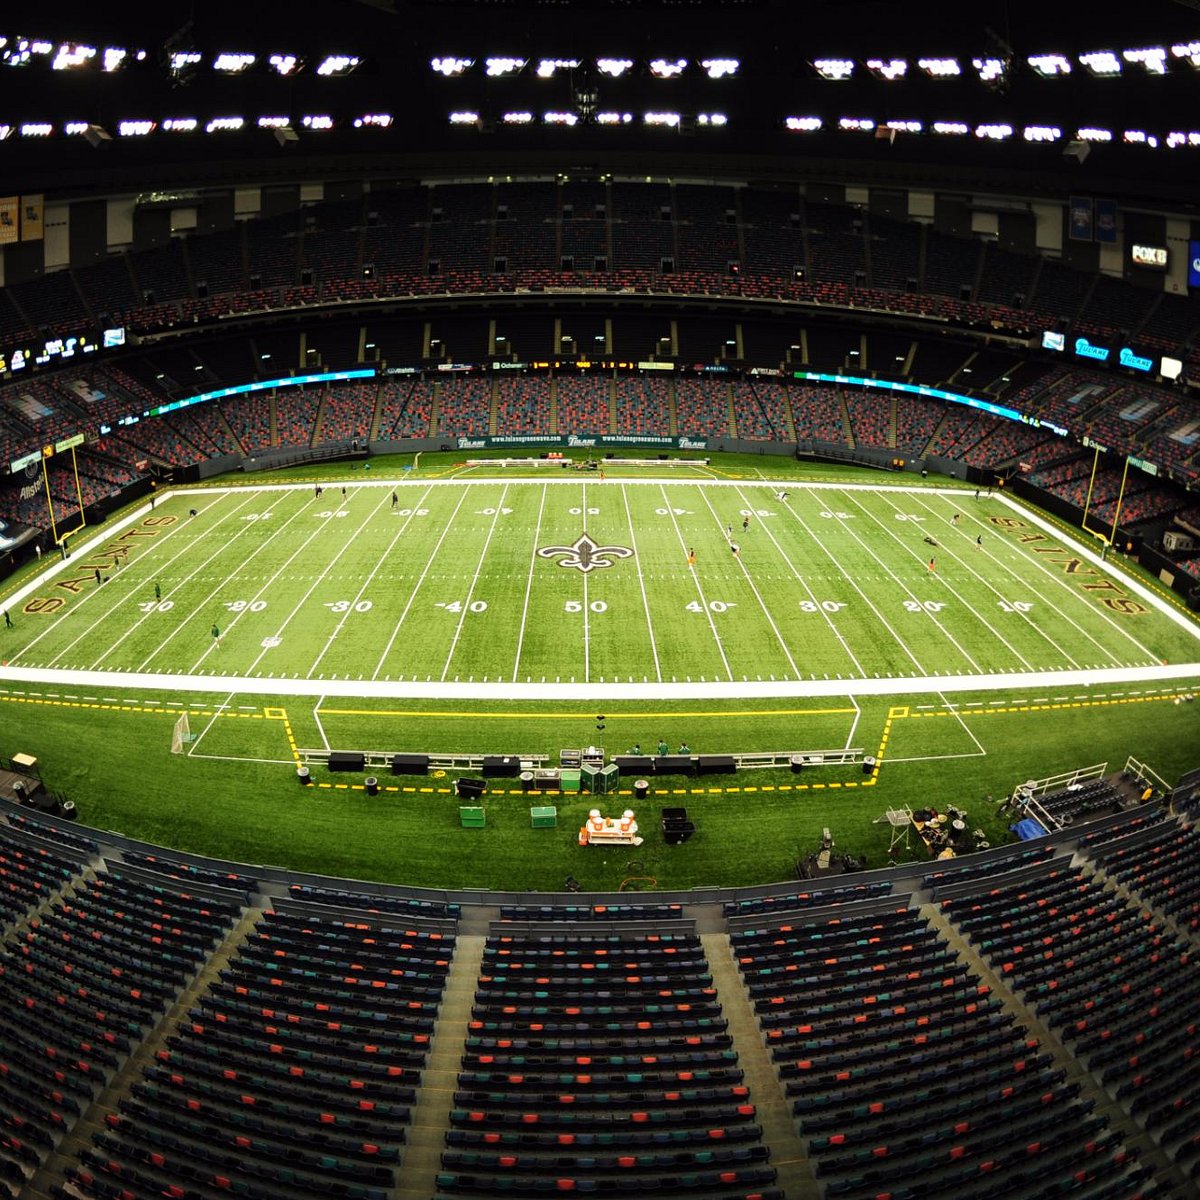 MercedesBenz Superdome (New Orleans) All You Need to Know